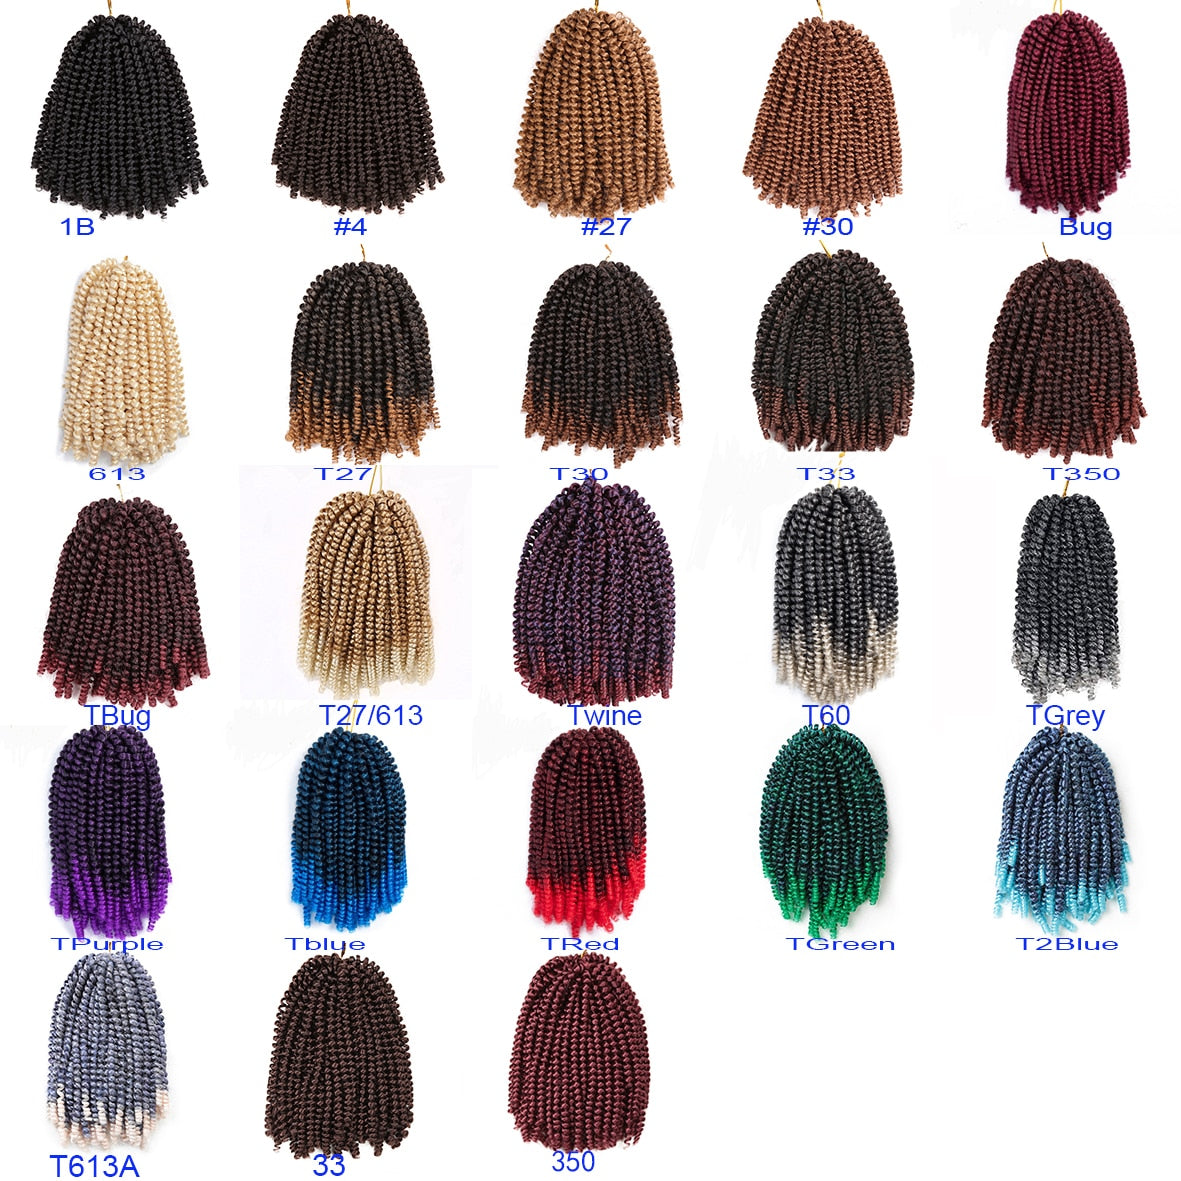 8 Inch/ 1-3 Packs Afro Fluffy Twist Braids Hair Extensions 